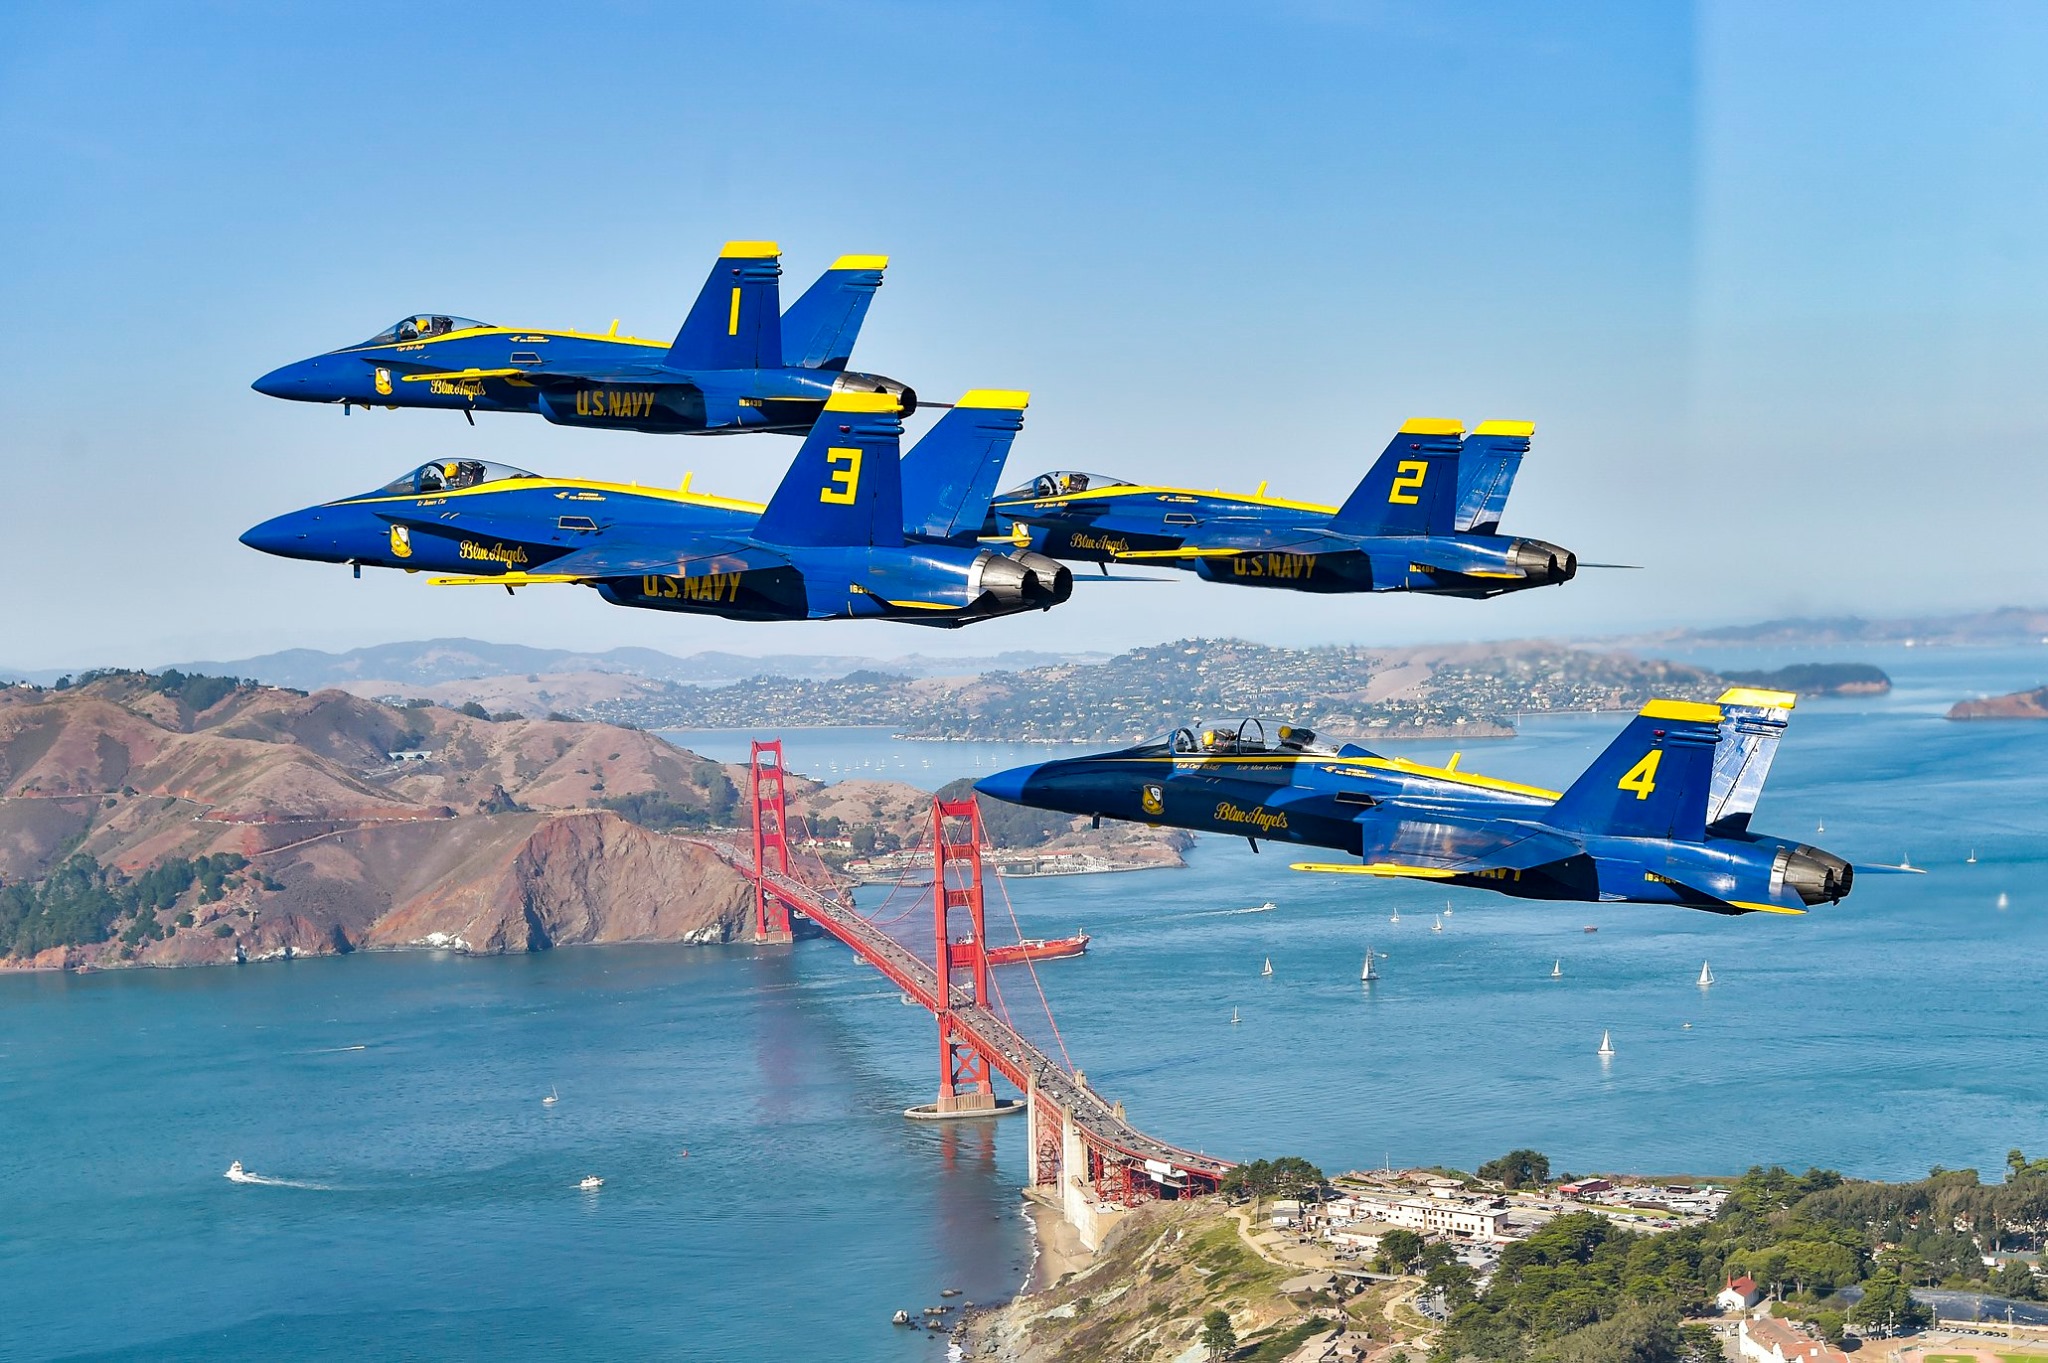 The Blue Angels fly over the Golden Gate Bridge in SF